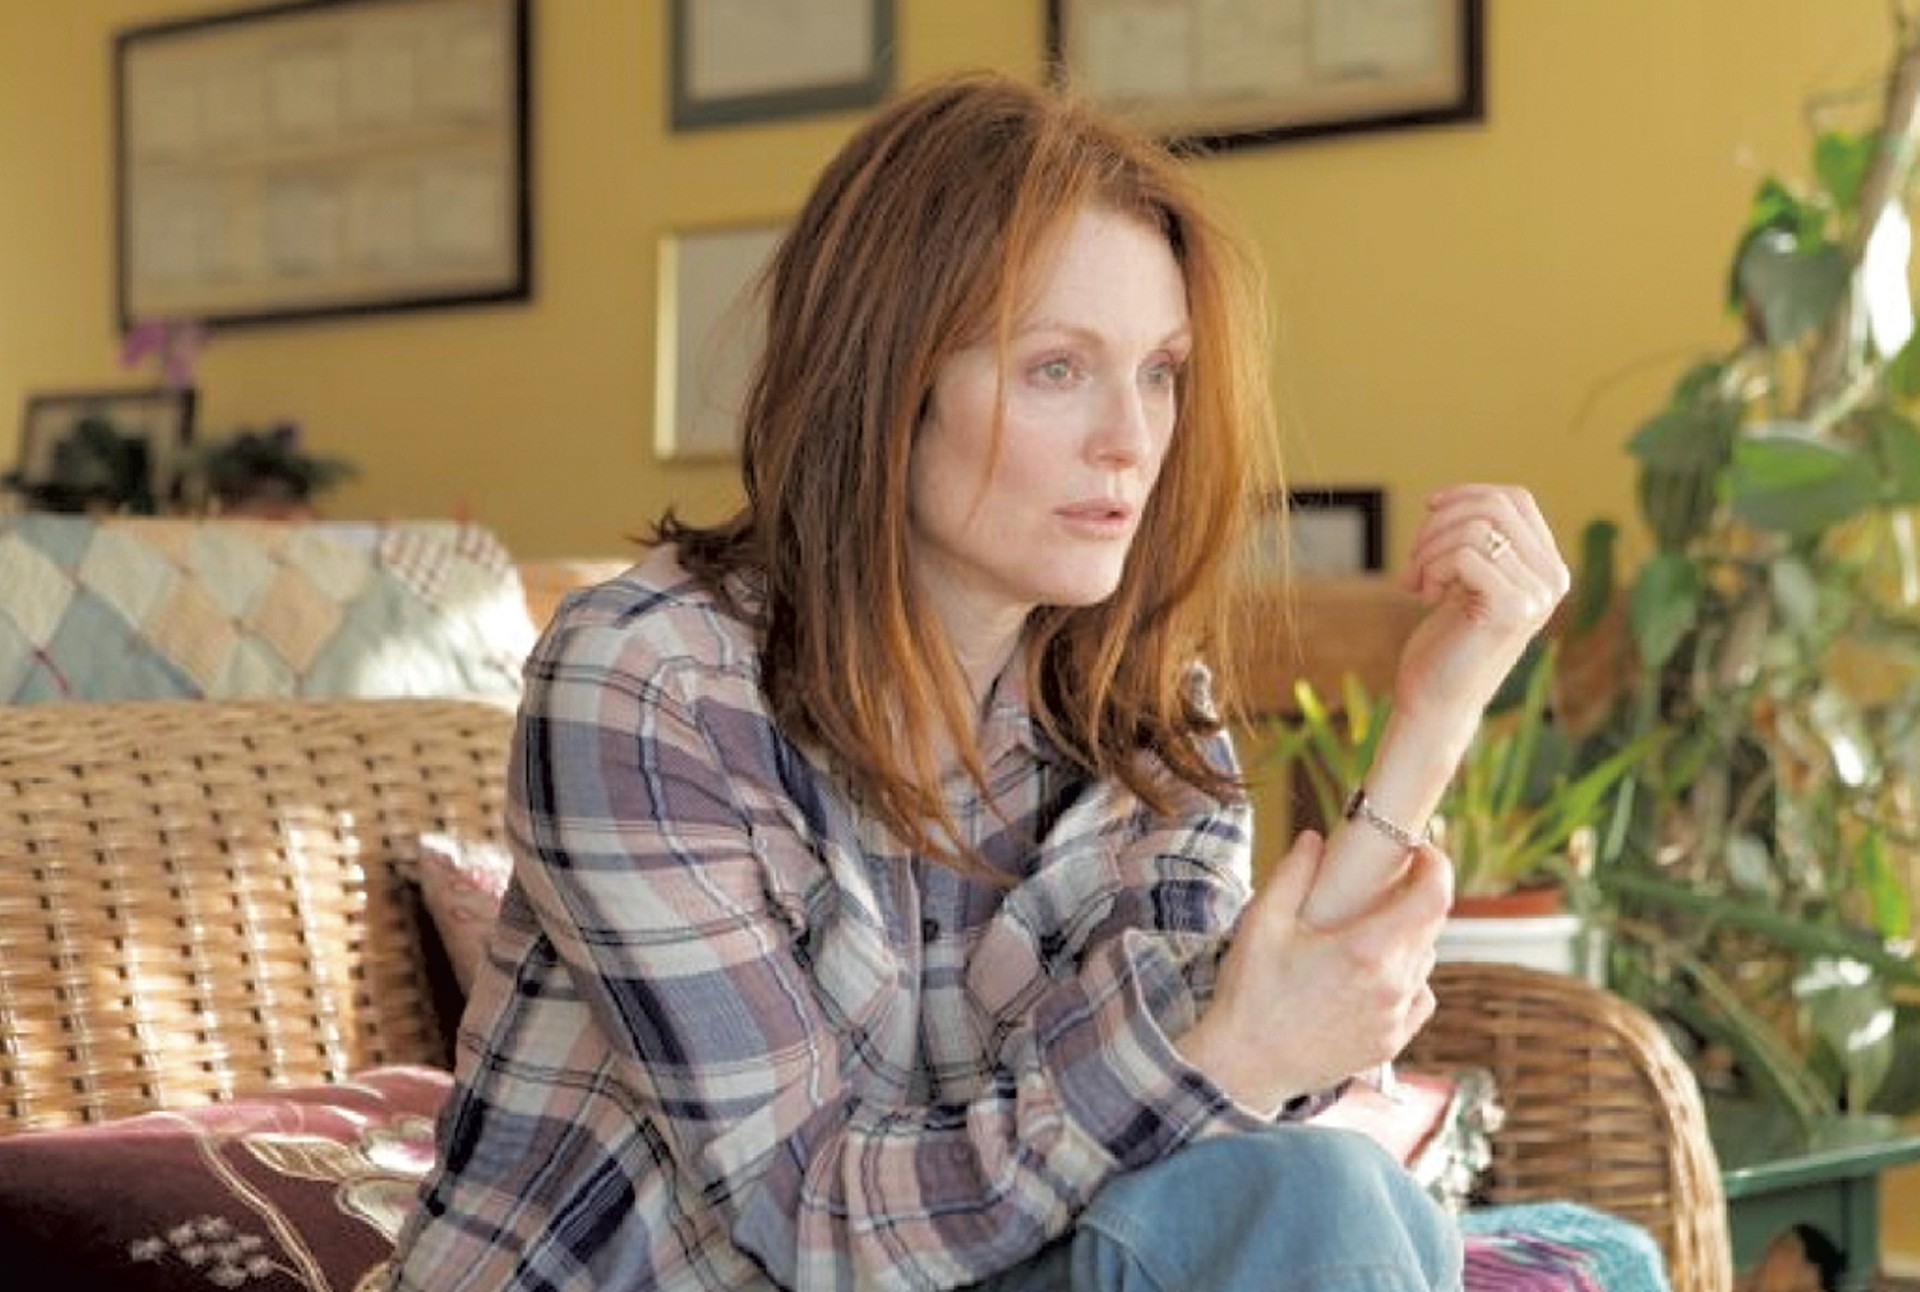 IDENTITY THEFT: Moore turns in a chillingly convincing performance in the role of an early-onset Alzheimer's patient.